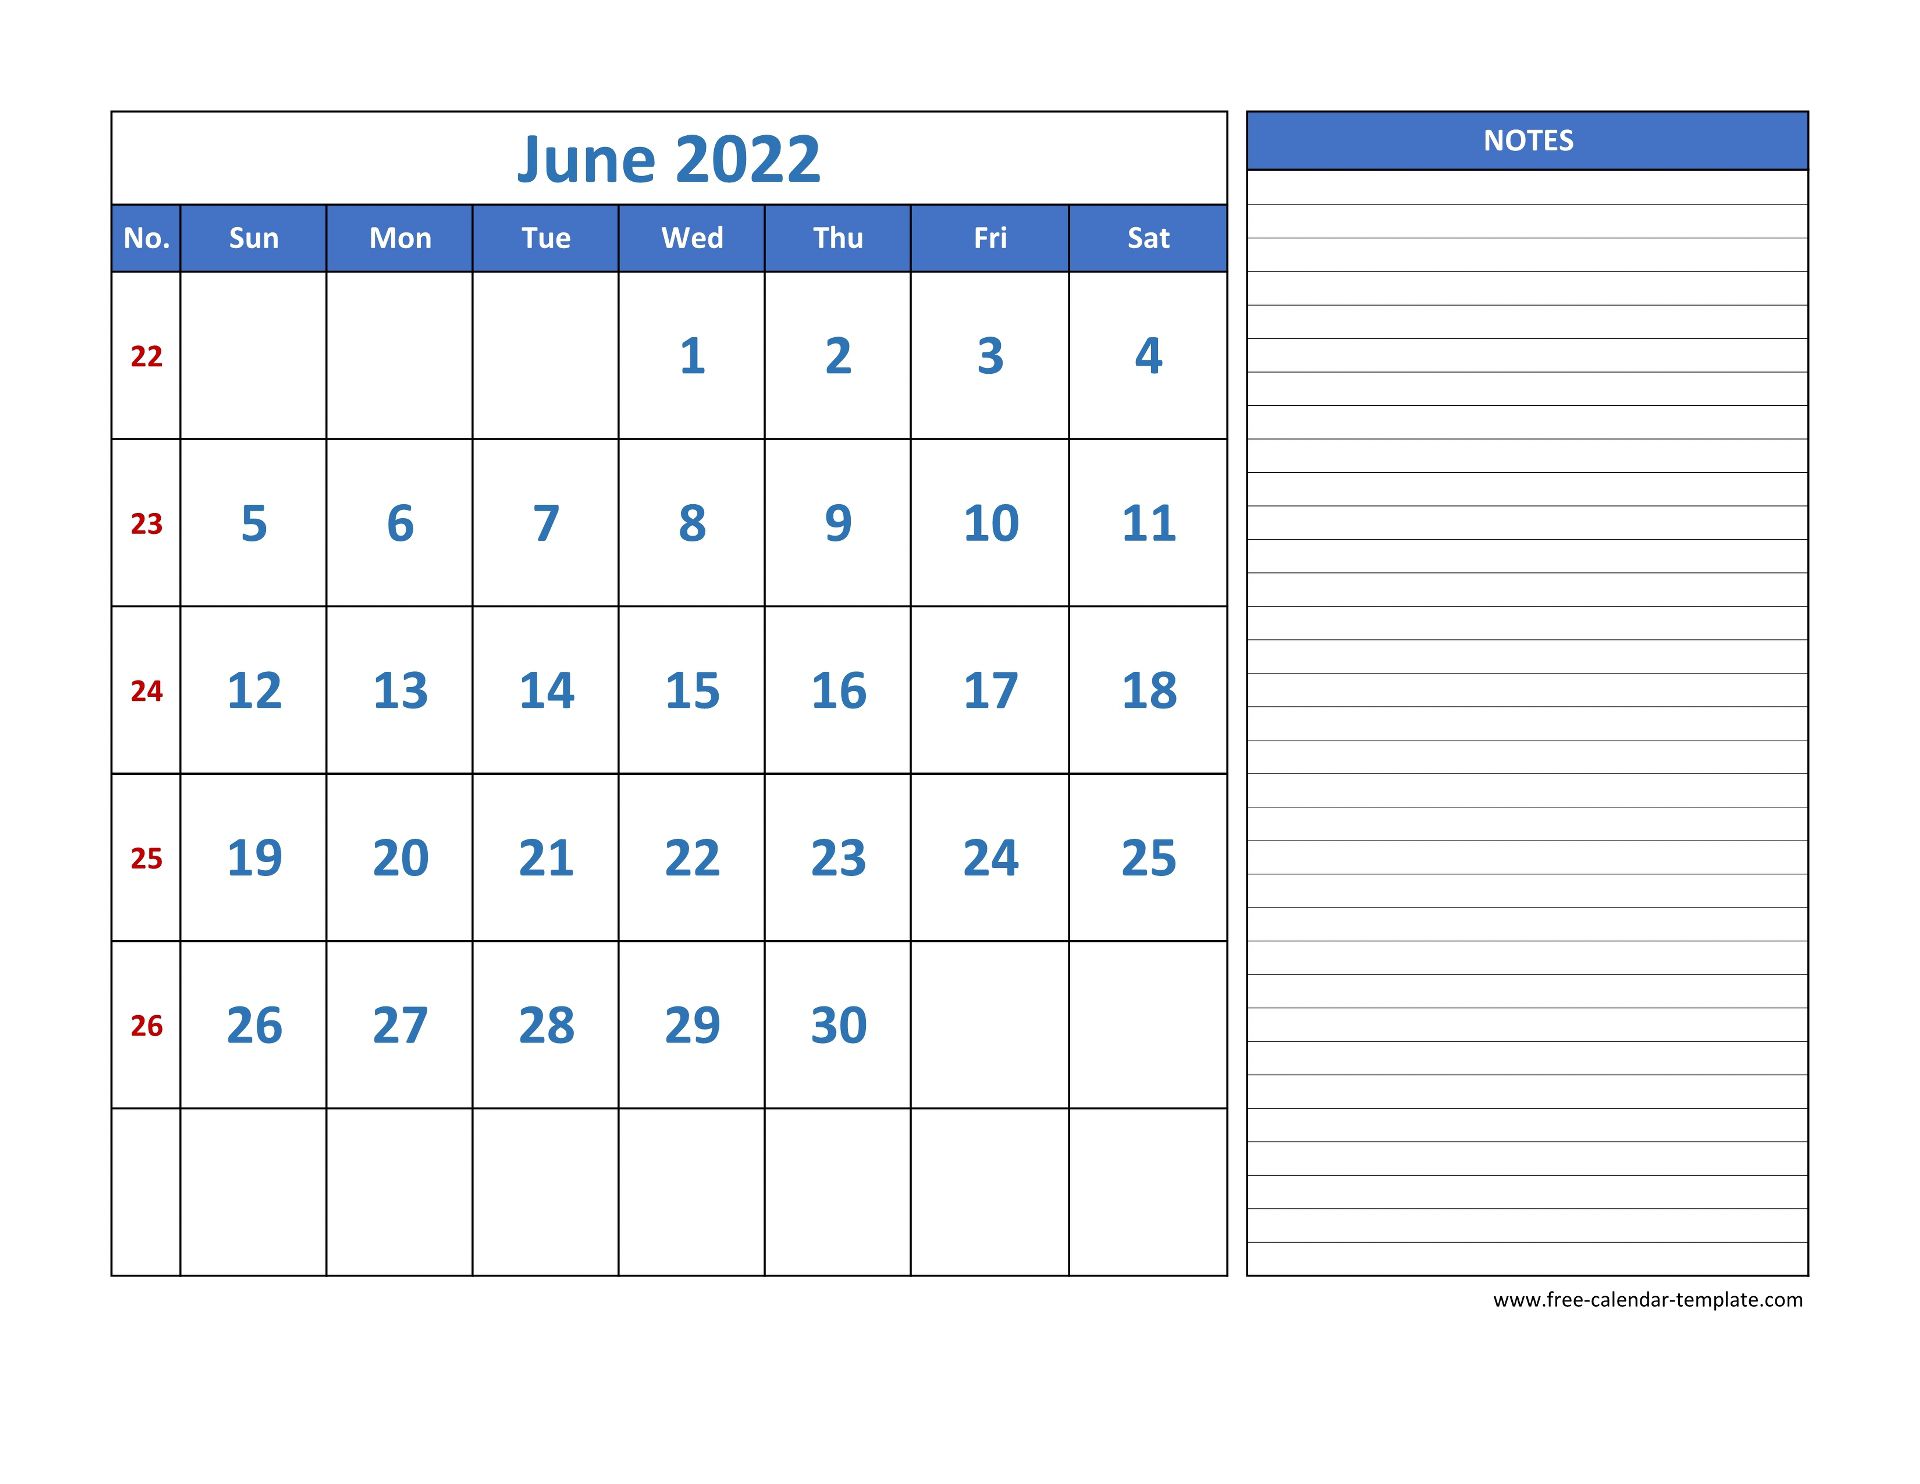 june calendar 2022 grid lines for holidays and notes horizontal